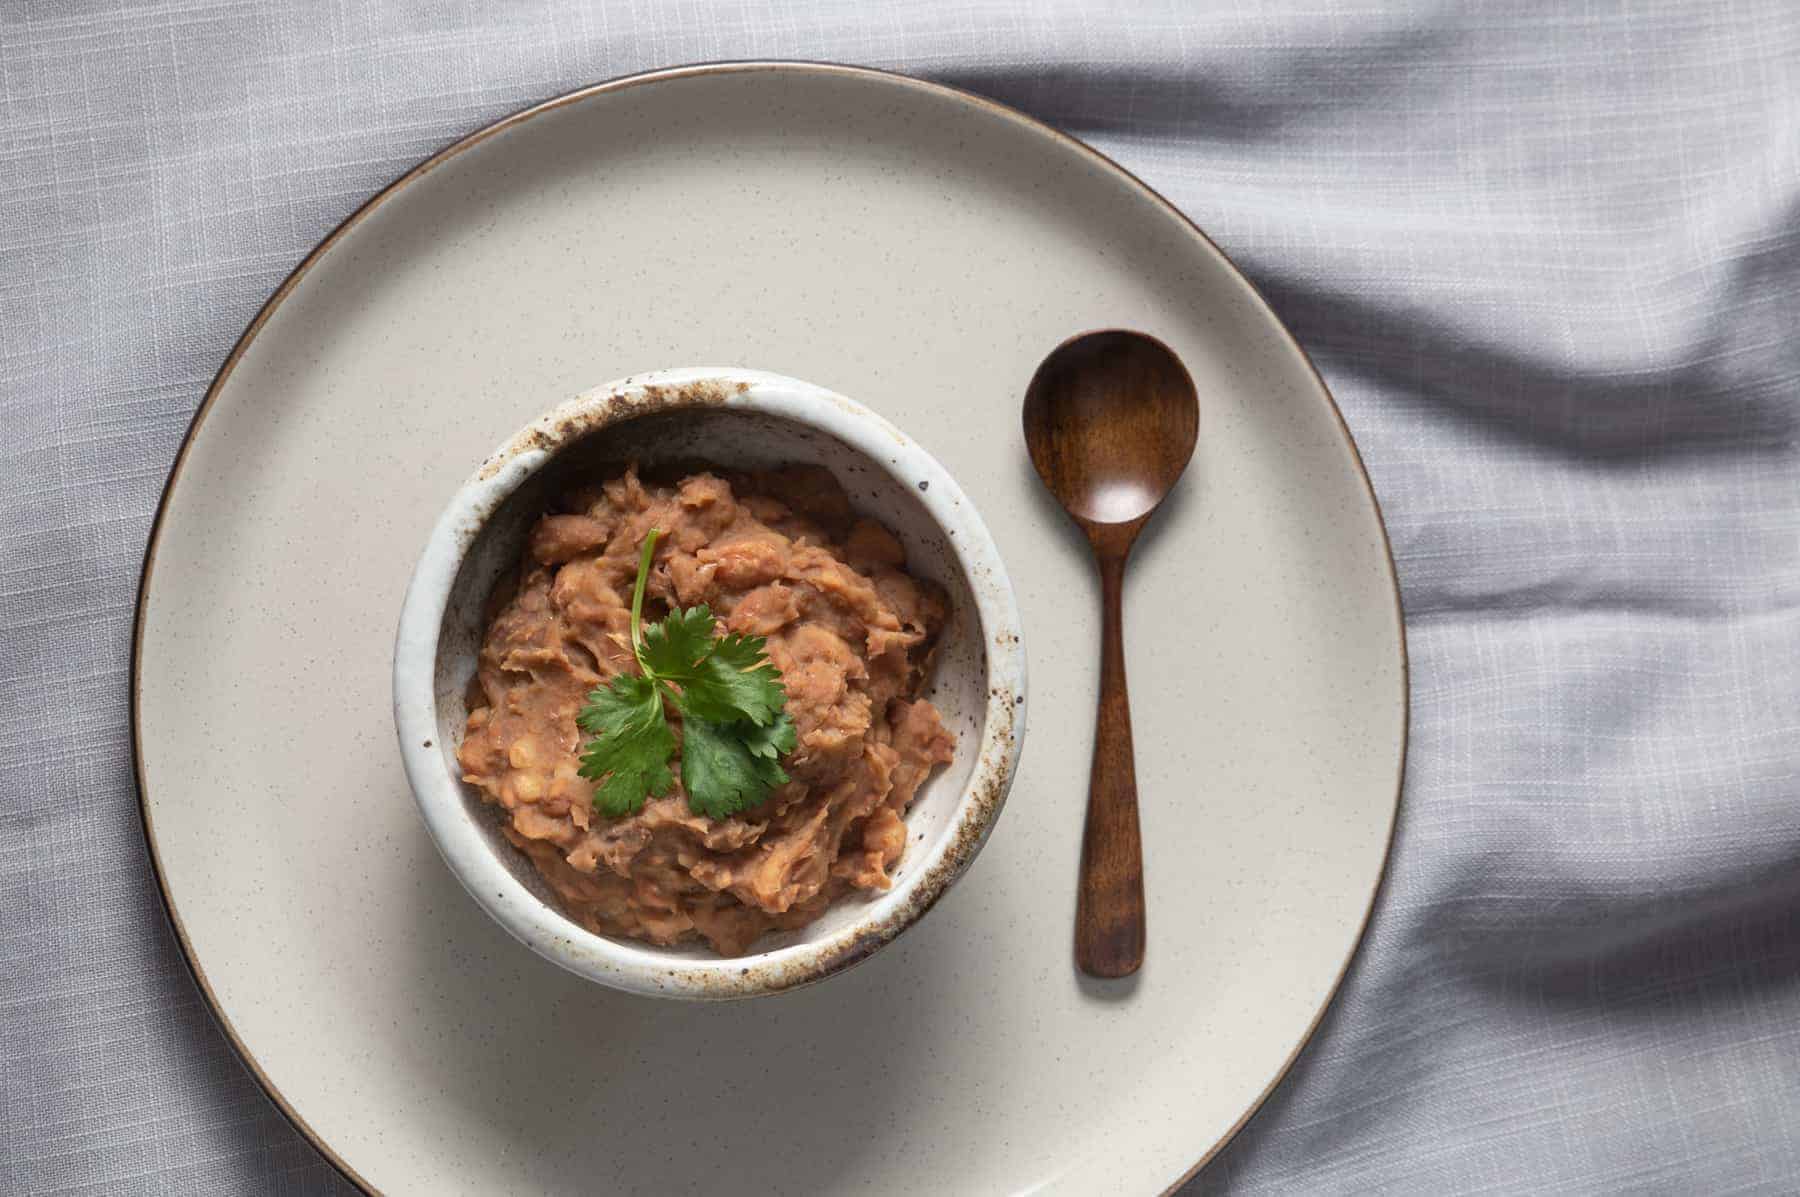 Instant Pot Refried Beans | Pressure Cooker Refried Beans | Instant Pot Pinto Beans | Instant Pot Beans | frijoles refritos | Mexican | Vegan | Vegetarian | Instant Pot Recipes #instantpot #pressurecooker #recipe #beans #side #dip #mexican